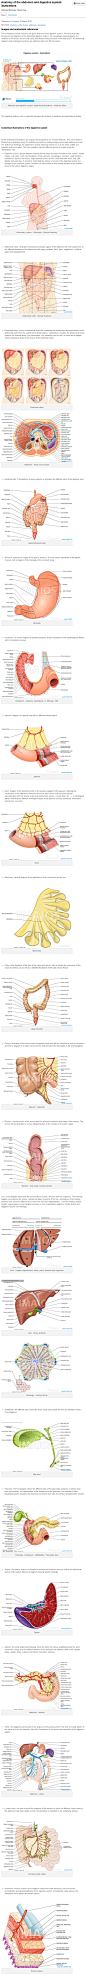 Abdomen and digestive system: anatomical illustrations